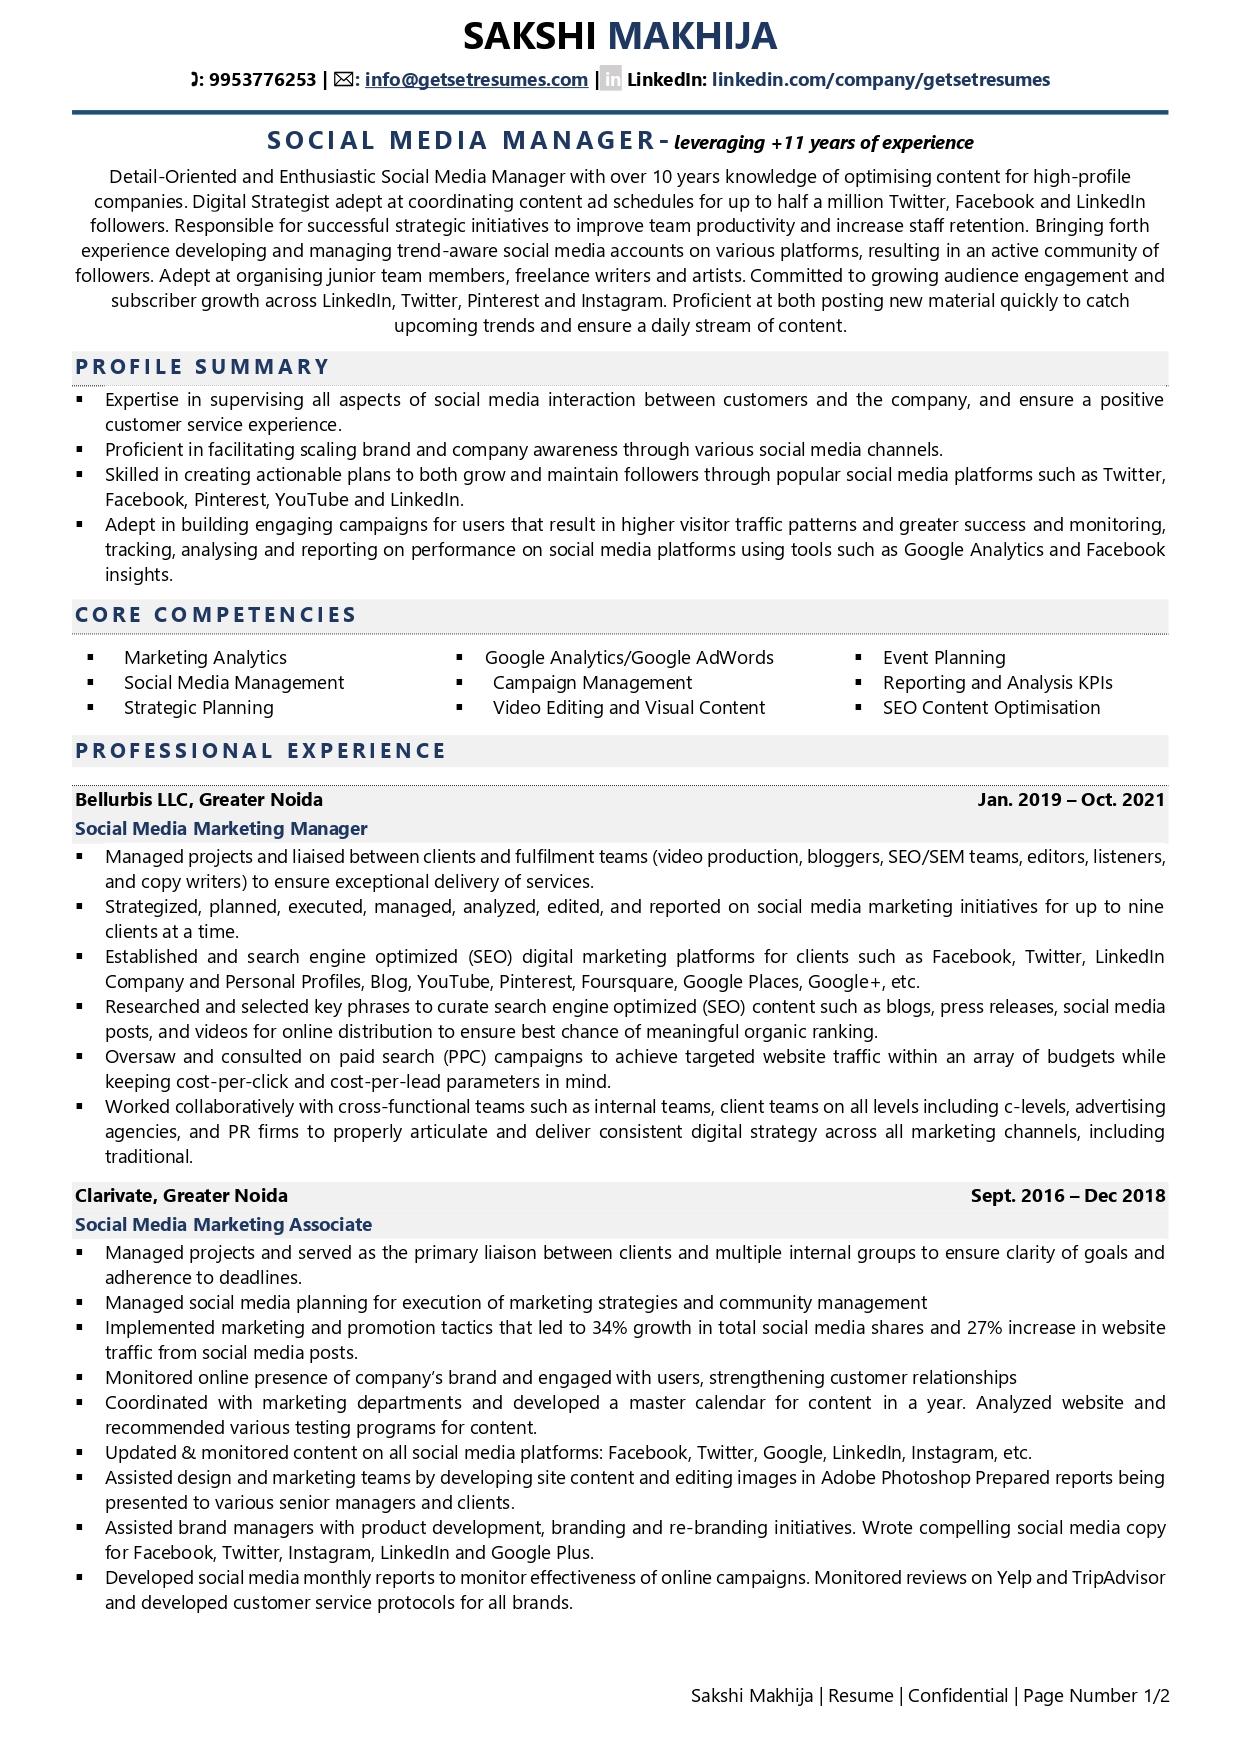 Social Media Manager - Resume Example & Template